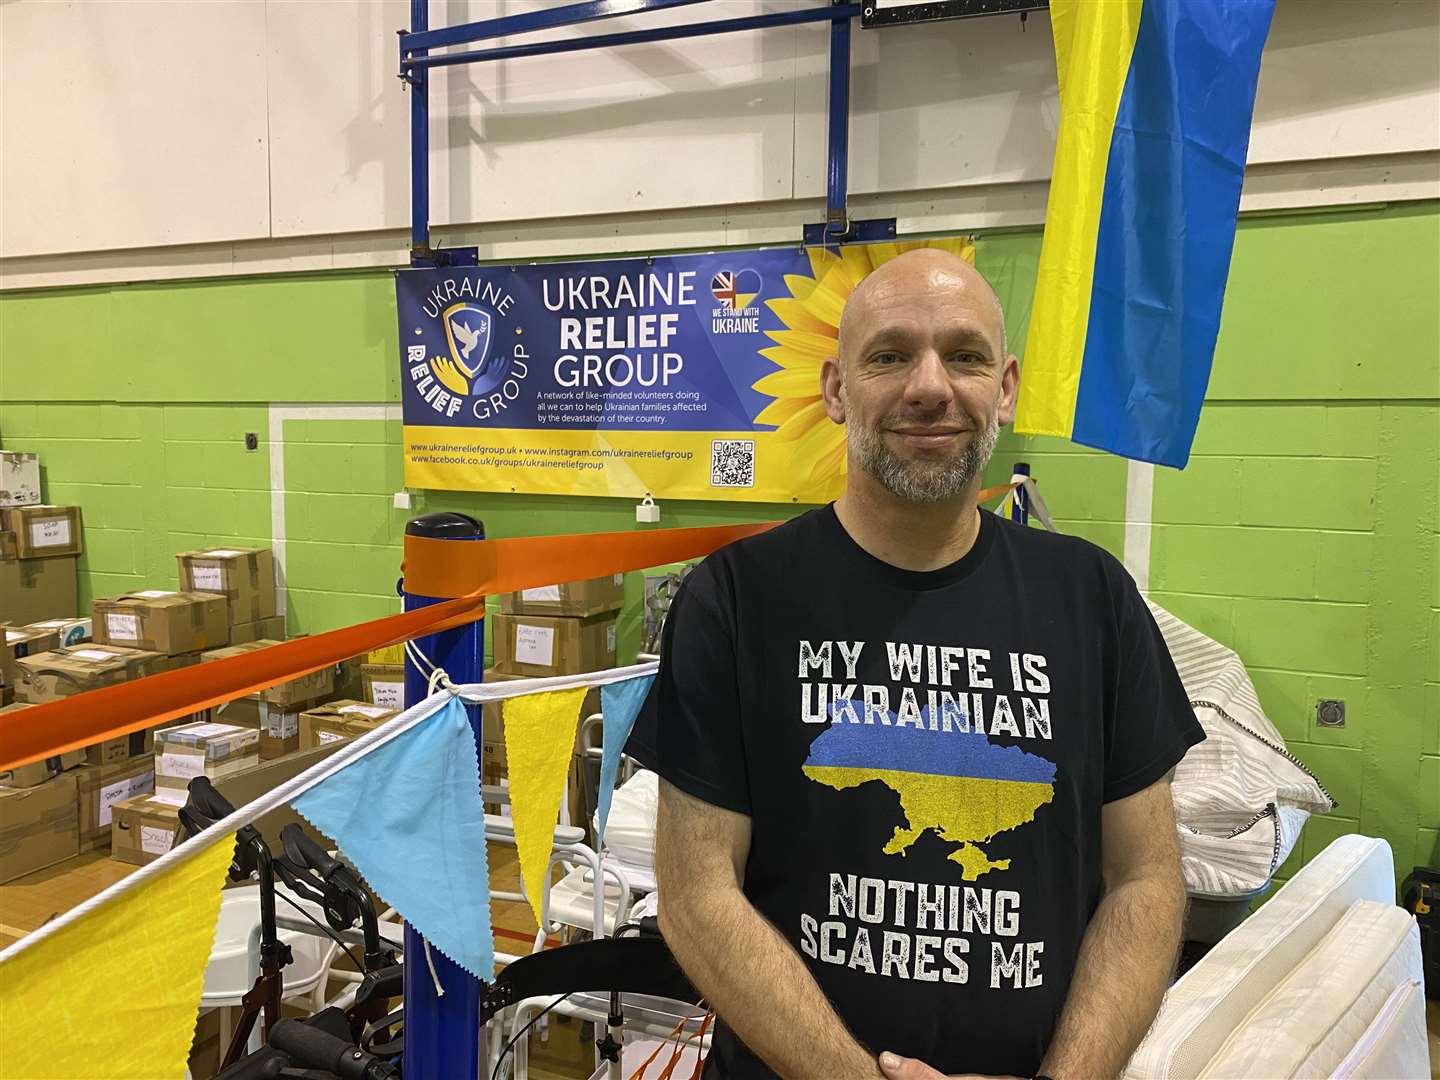 Richard Akehurst set up the Ukraine Relief Group two days after the war broke out